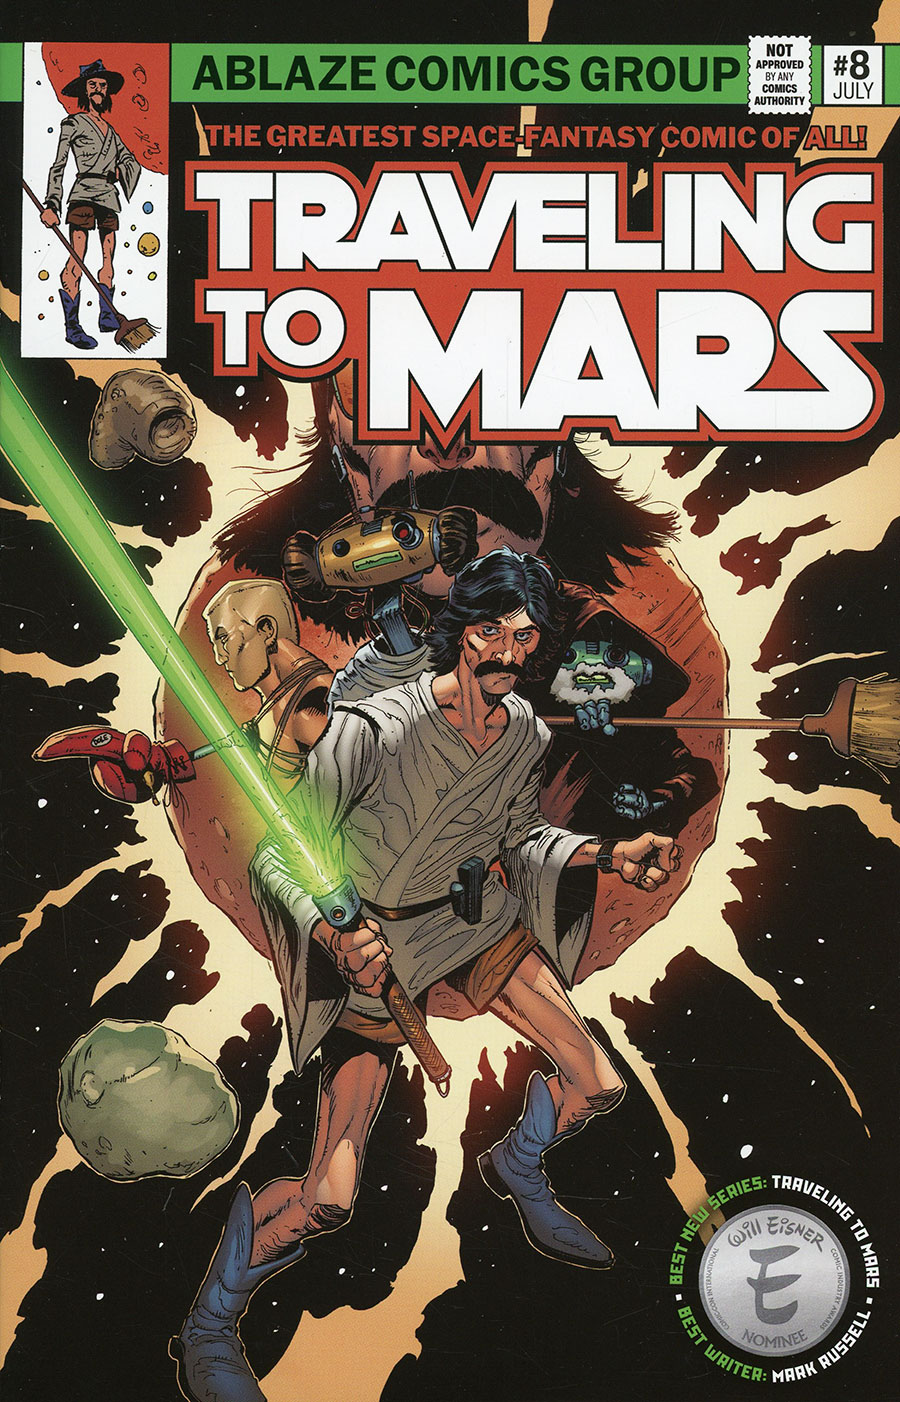 Traveling To Mars #8 Cover D Variant Brent McKee Star Wars 1 Parody Cover